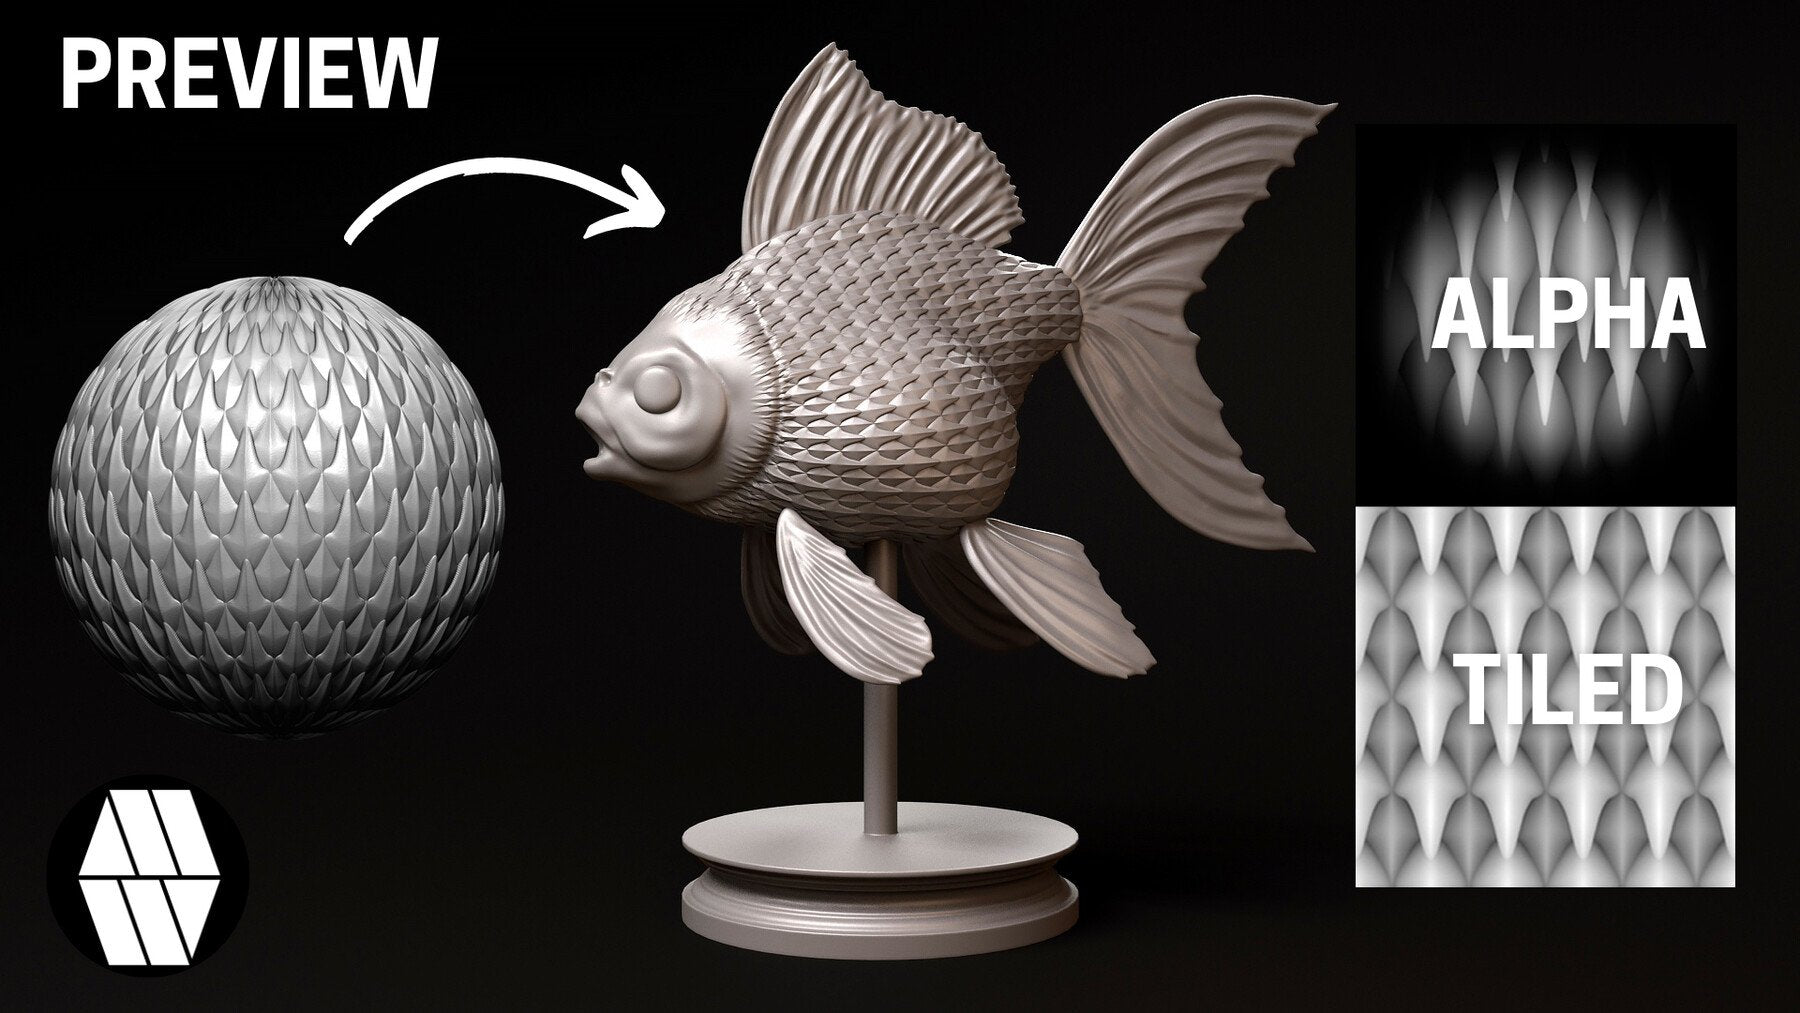 20 Scale Tiled Alphas for ZBrush